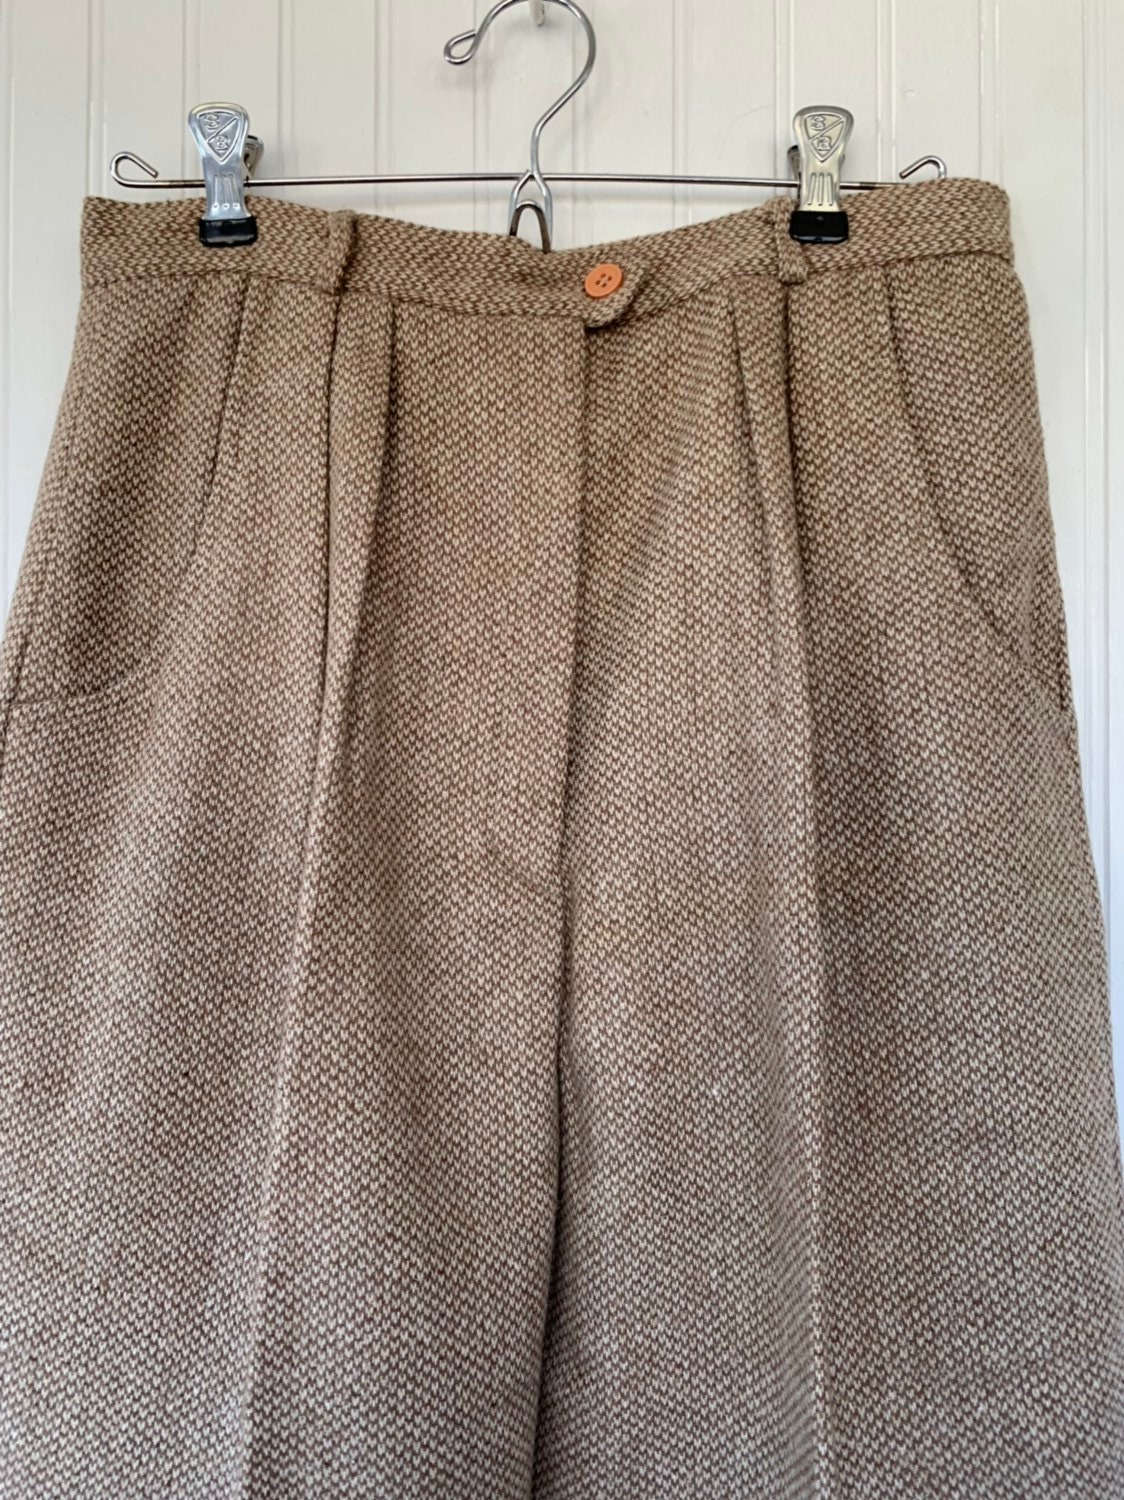 NWT Vintage 80s Jordache Deadstock Tweed High Waisted Trousers 30 Tan ...